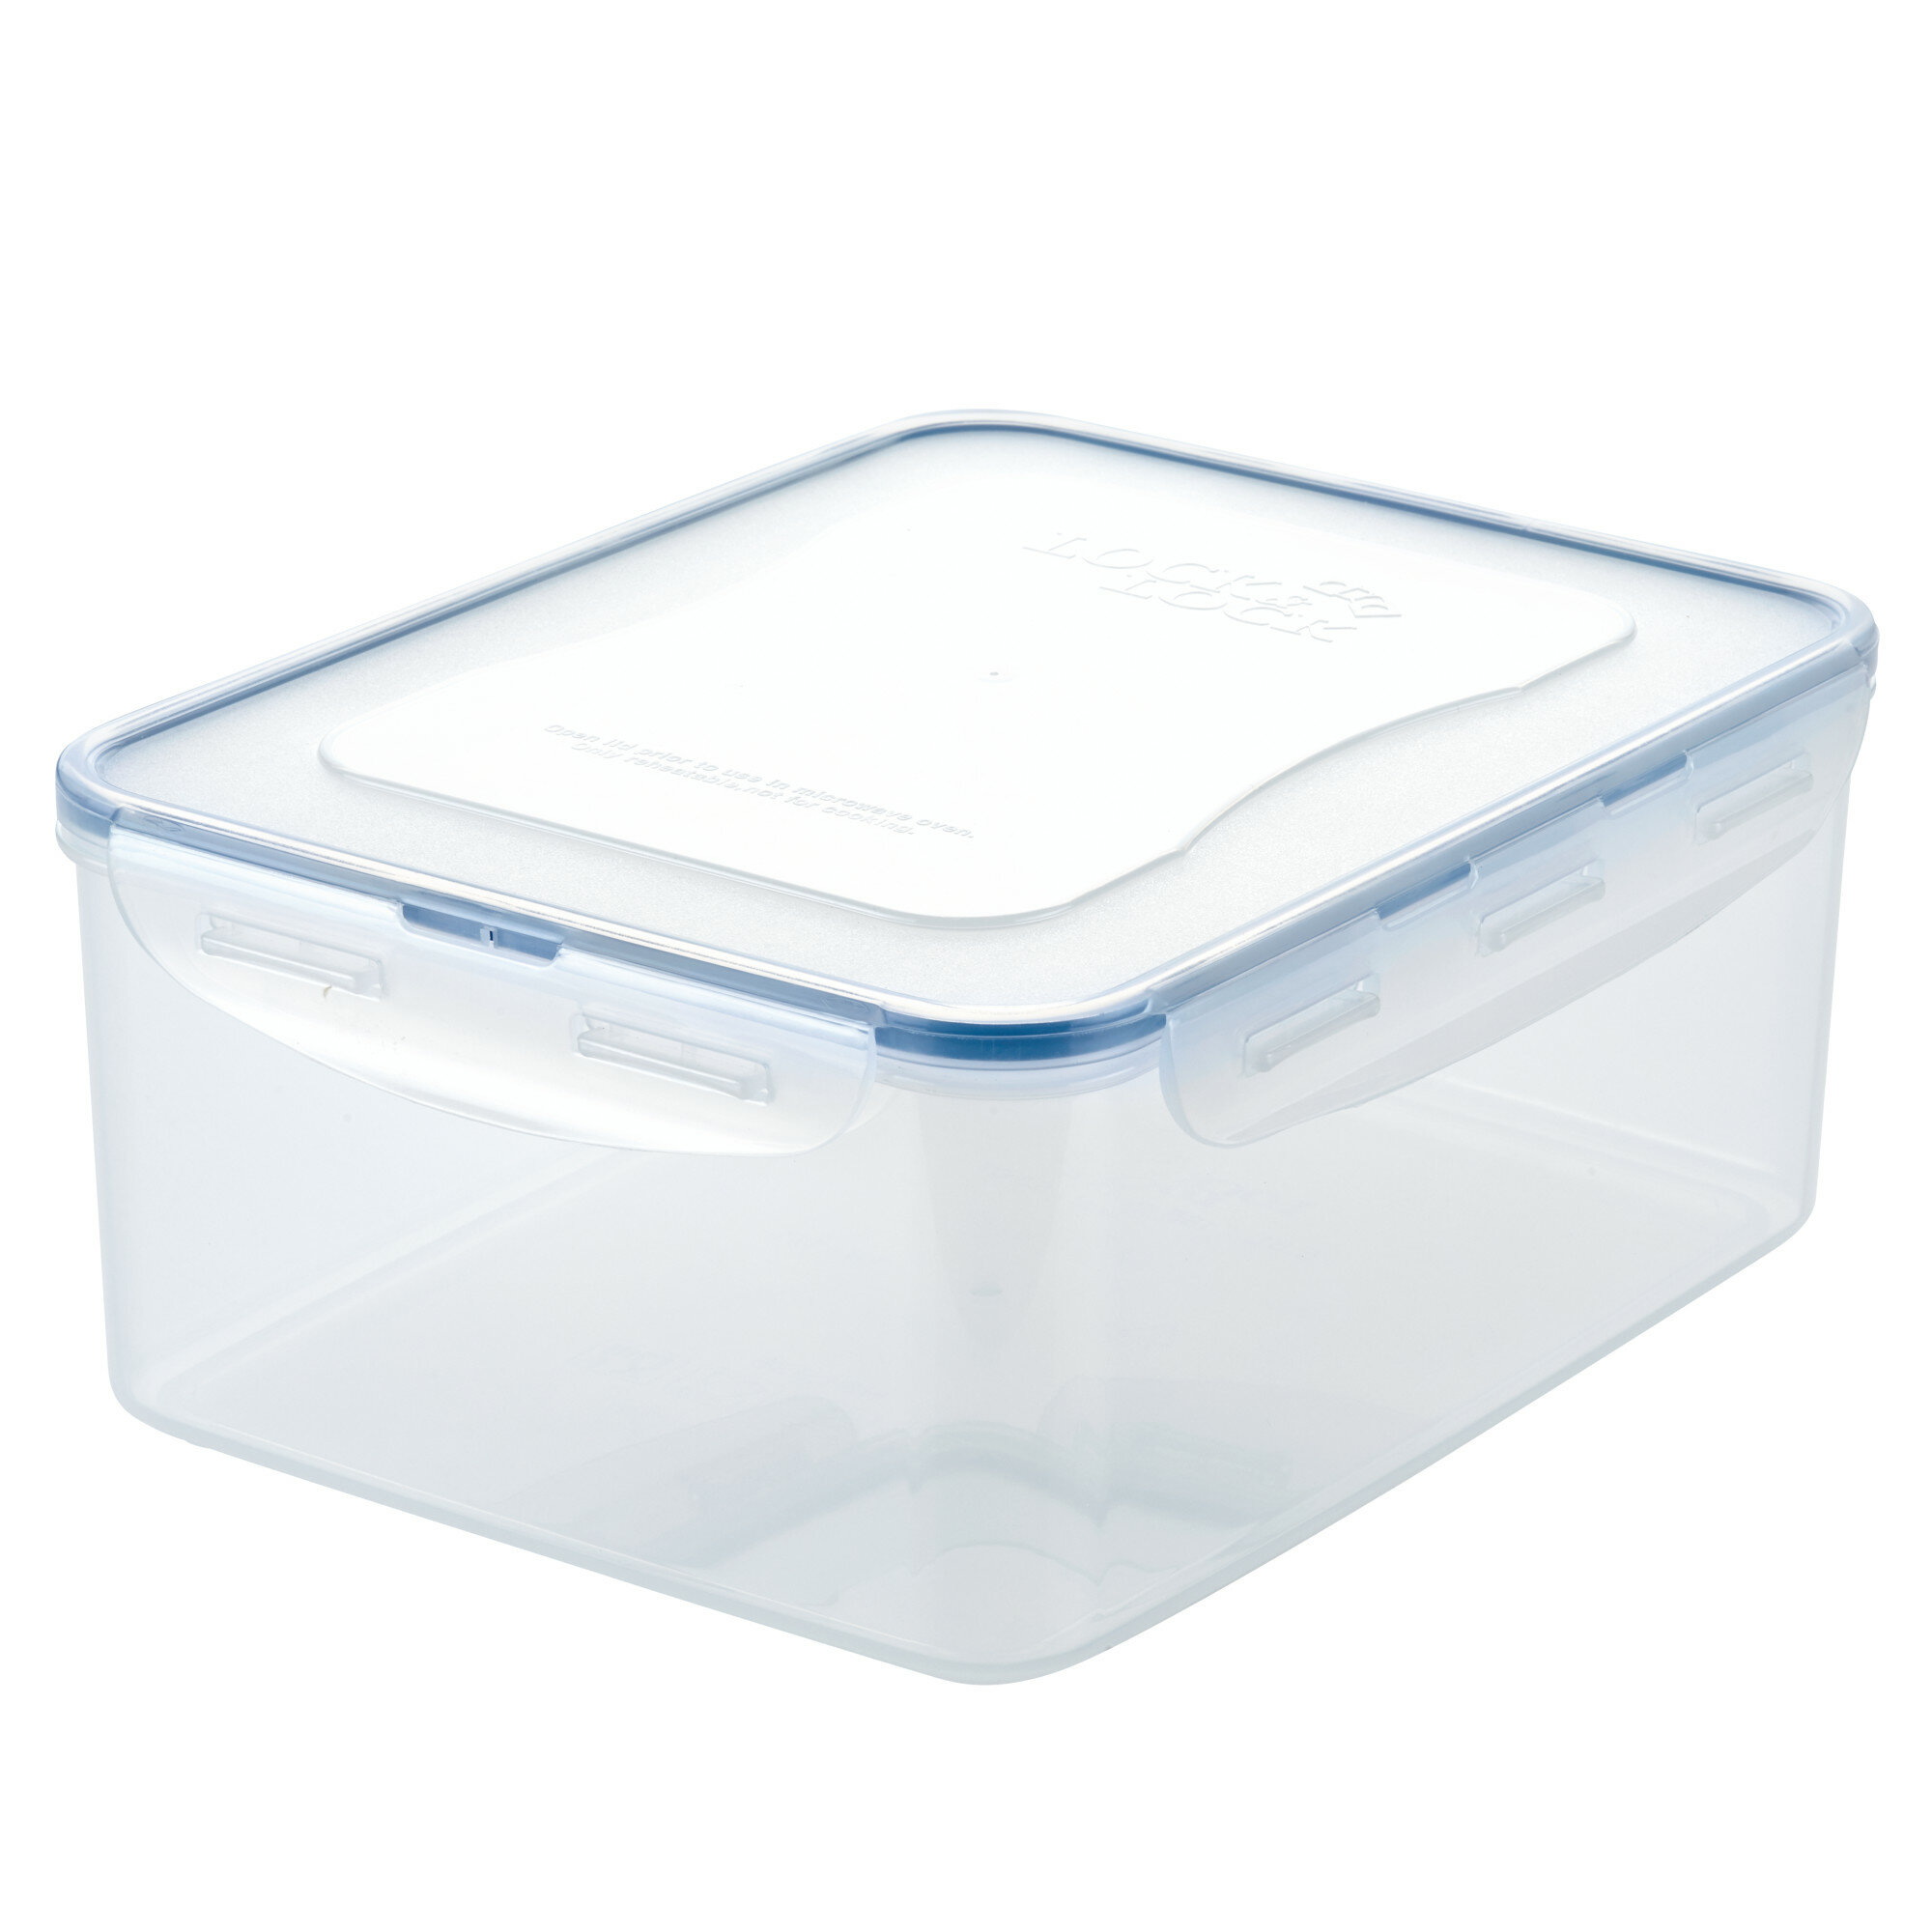 Multifunctional Reusable Container, Plastic Containers With Latch